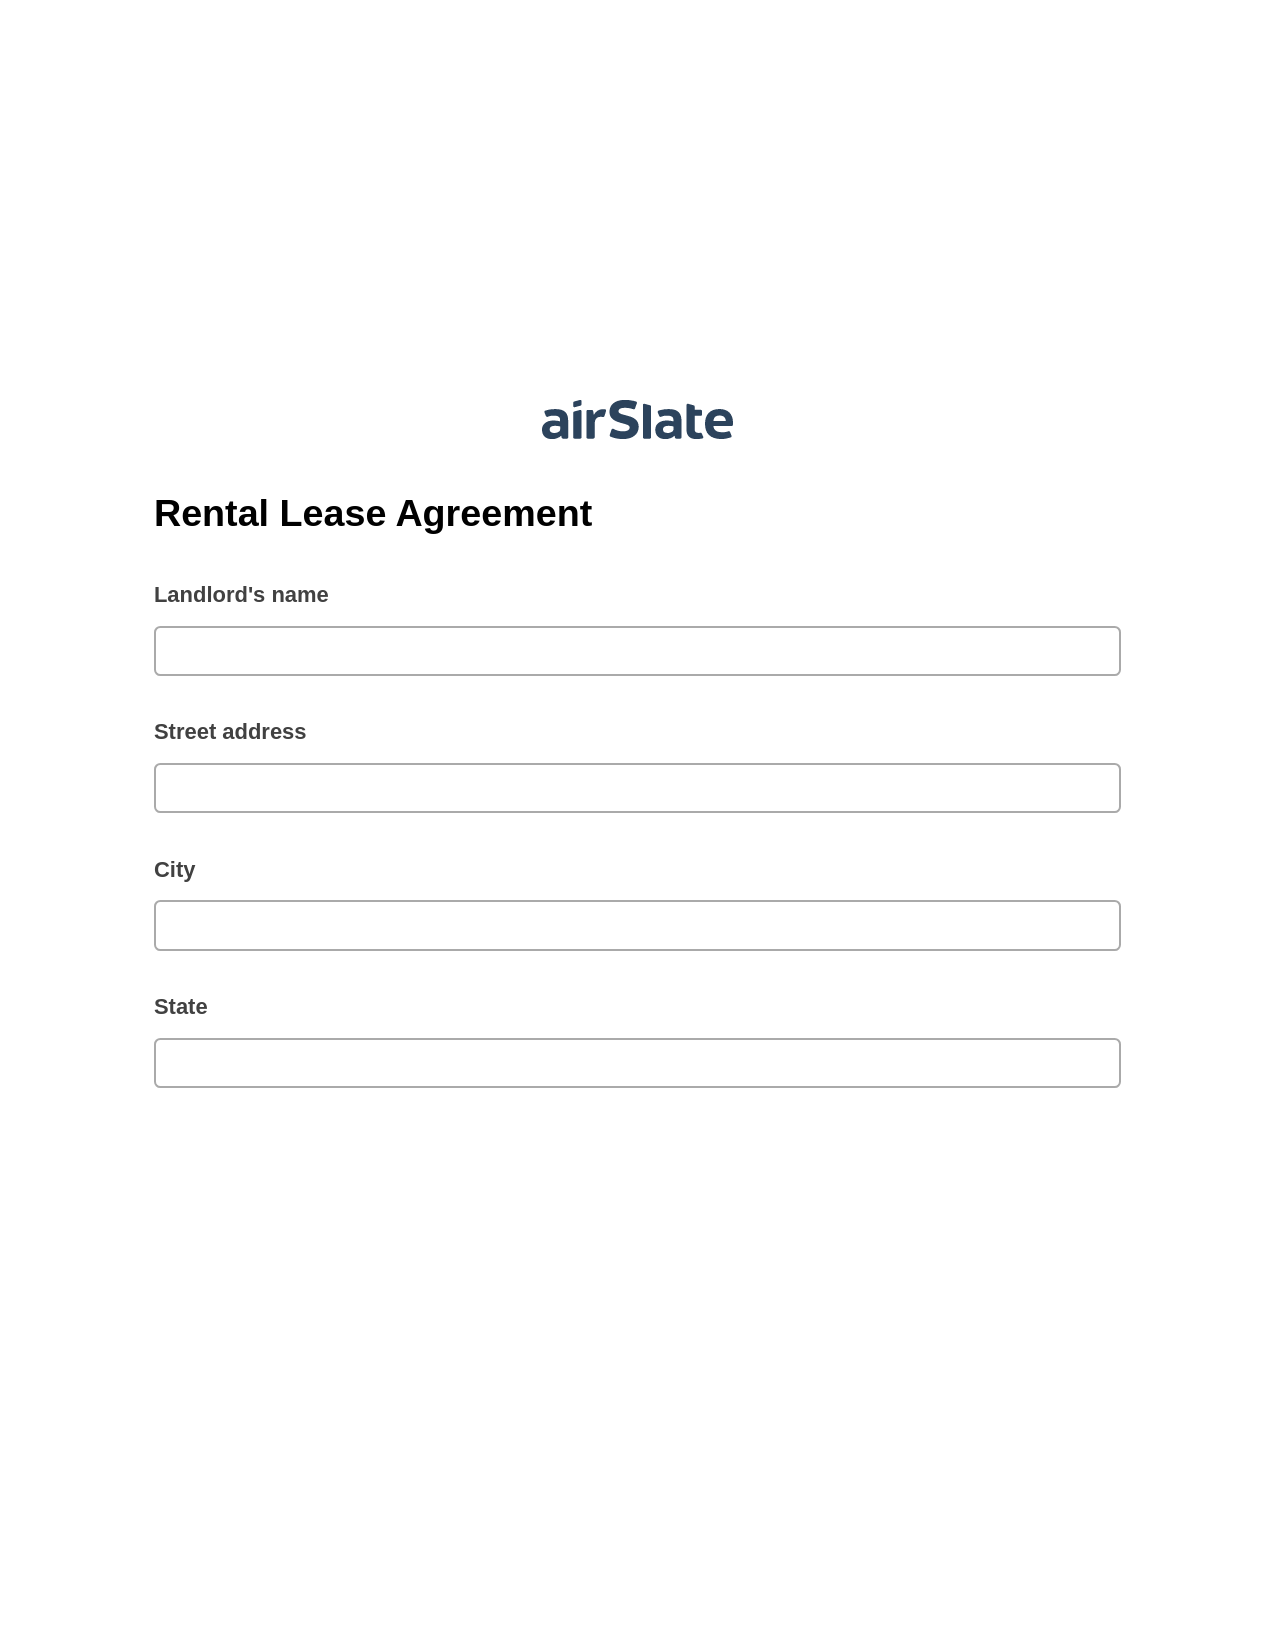 Rental Lease Agreement Pre-fill from Excel Spreadsheet Bot, Open as Role Bot, Export to Google Sheet Bot